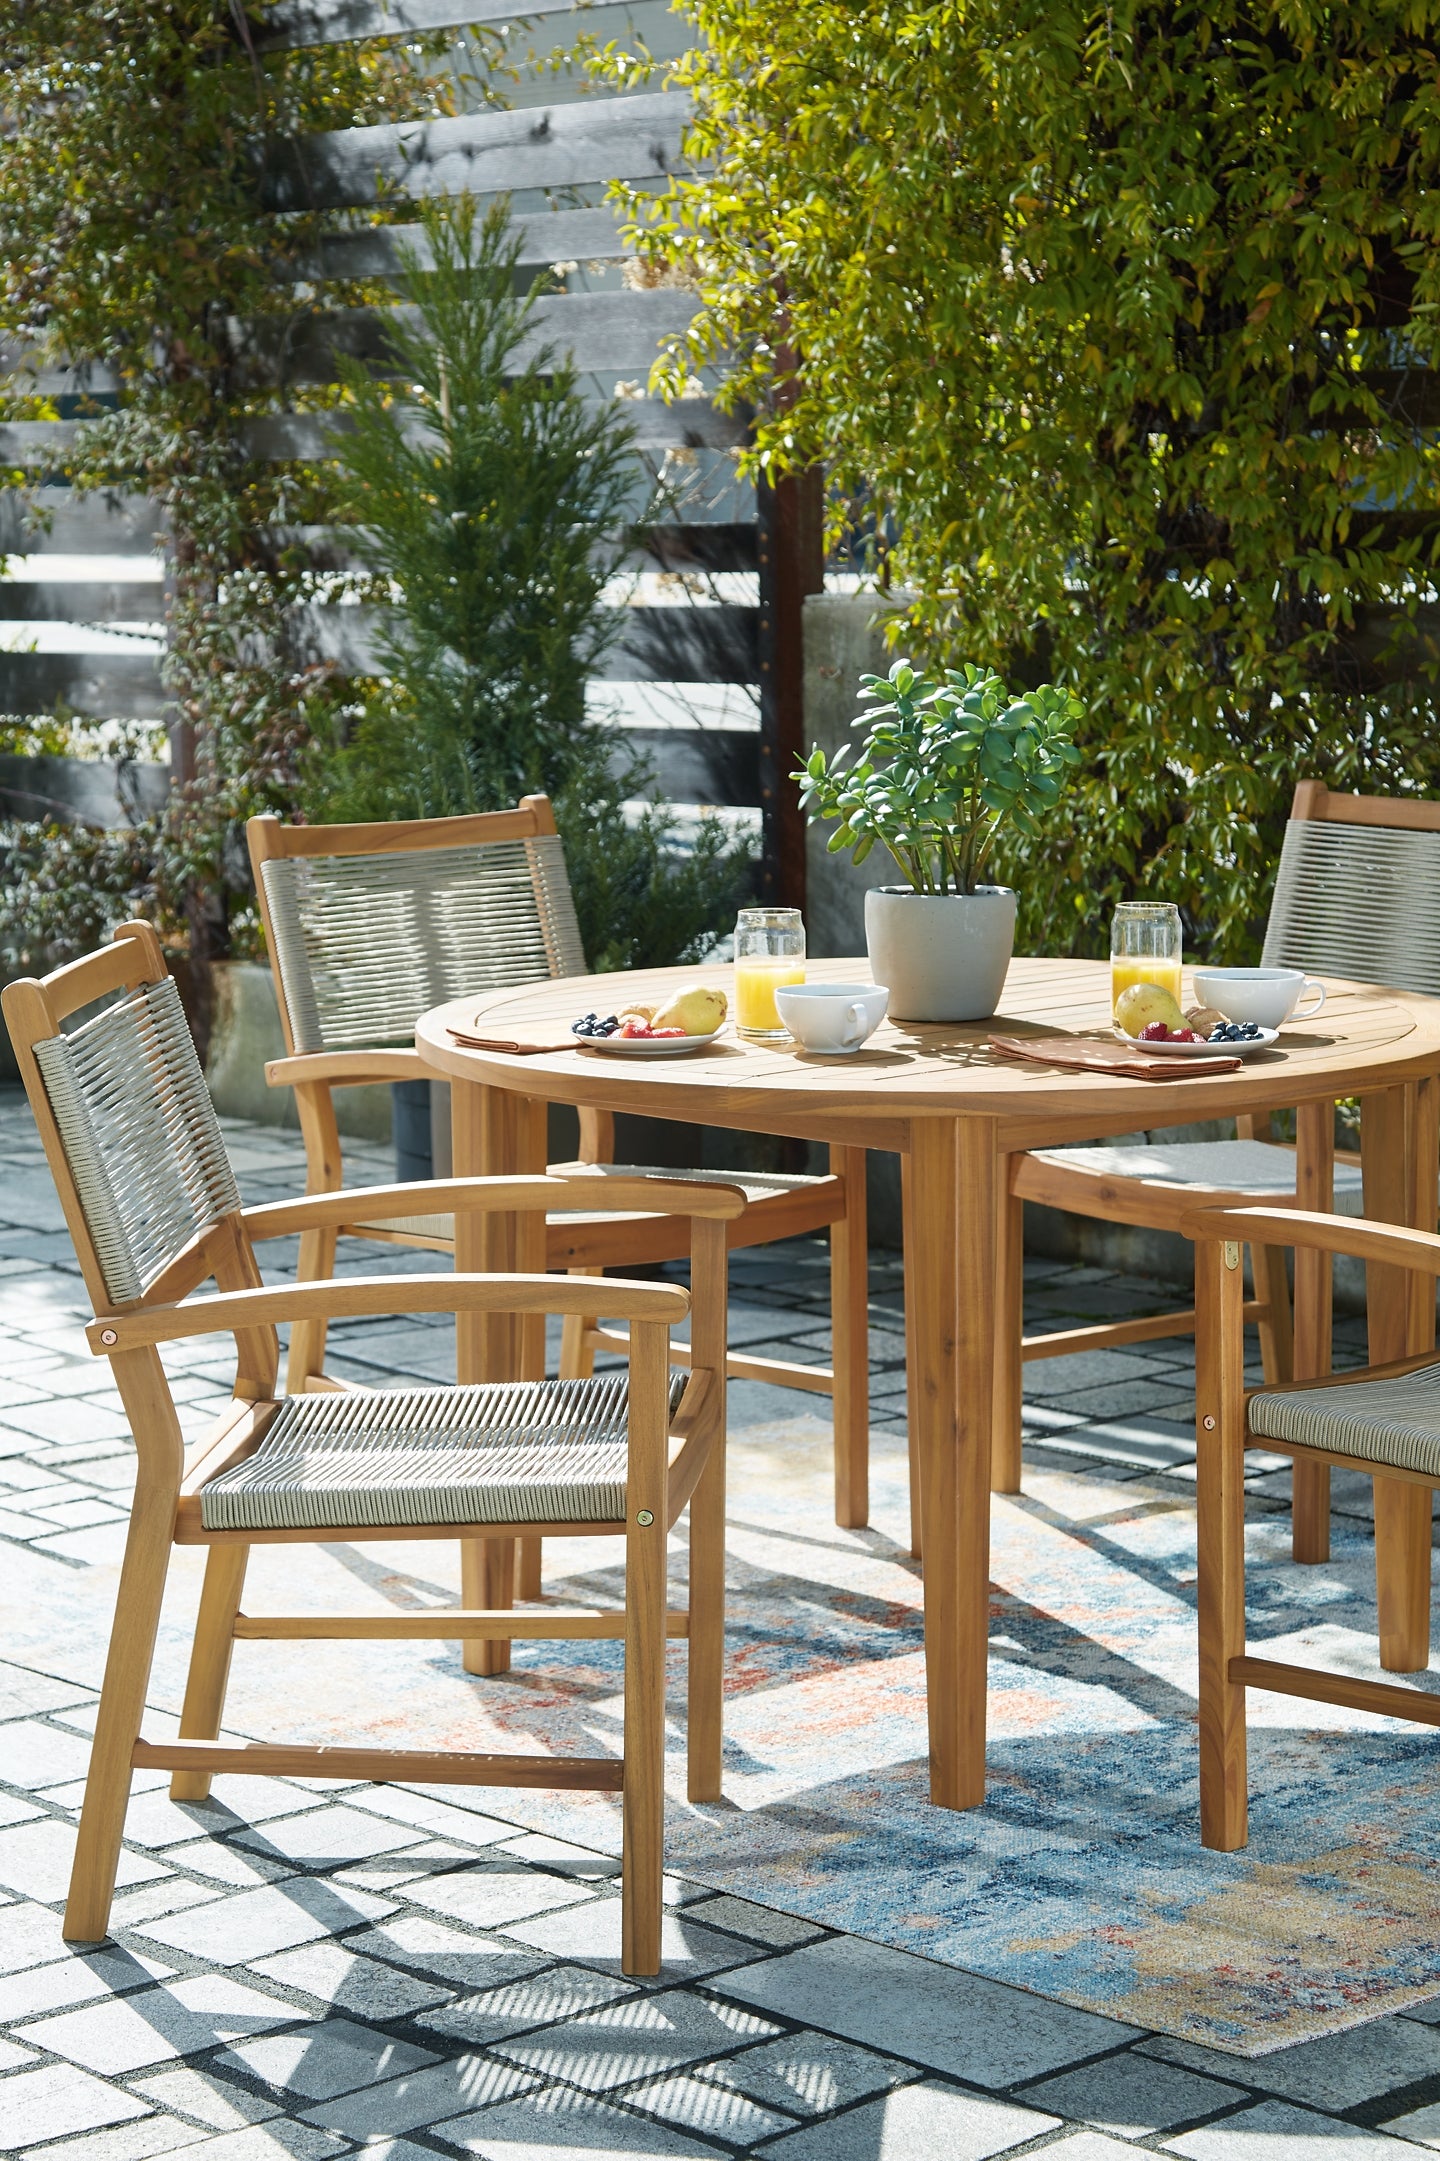 Janiyah Outdoor Dining Table and 4 Chairs Wilson Furniture (OH)  in Bridgeport, Ohio. Serving Bridgeport, Yorkville, Bellaire, & Avondale